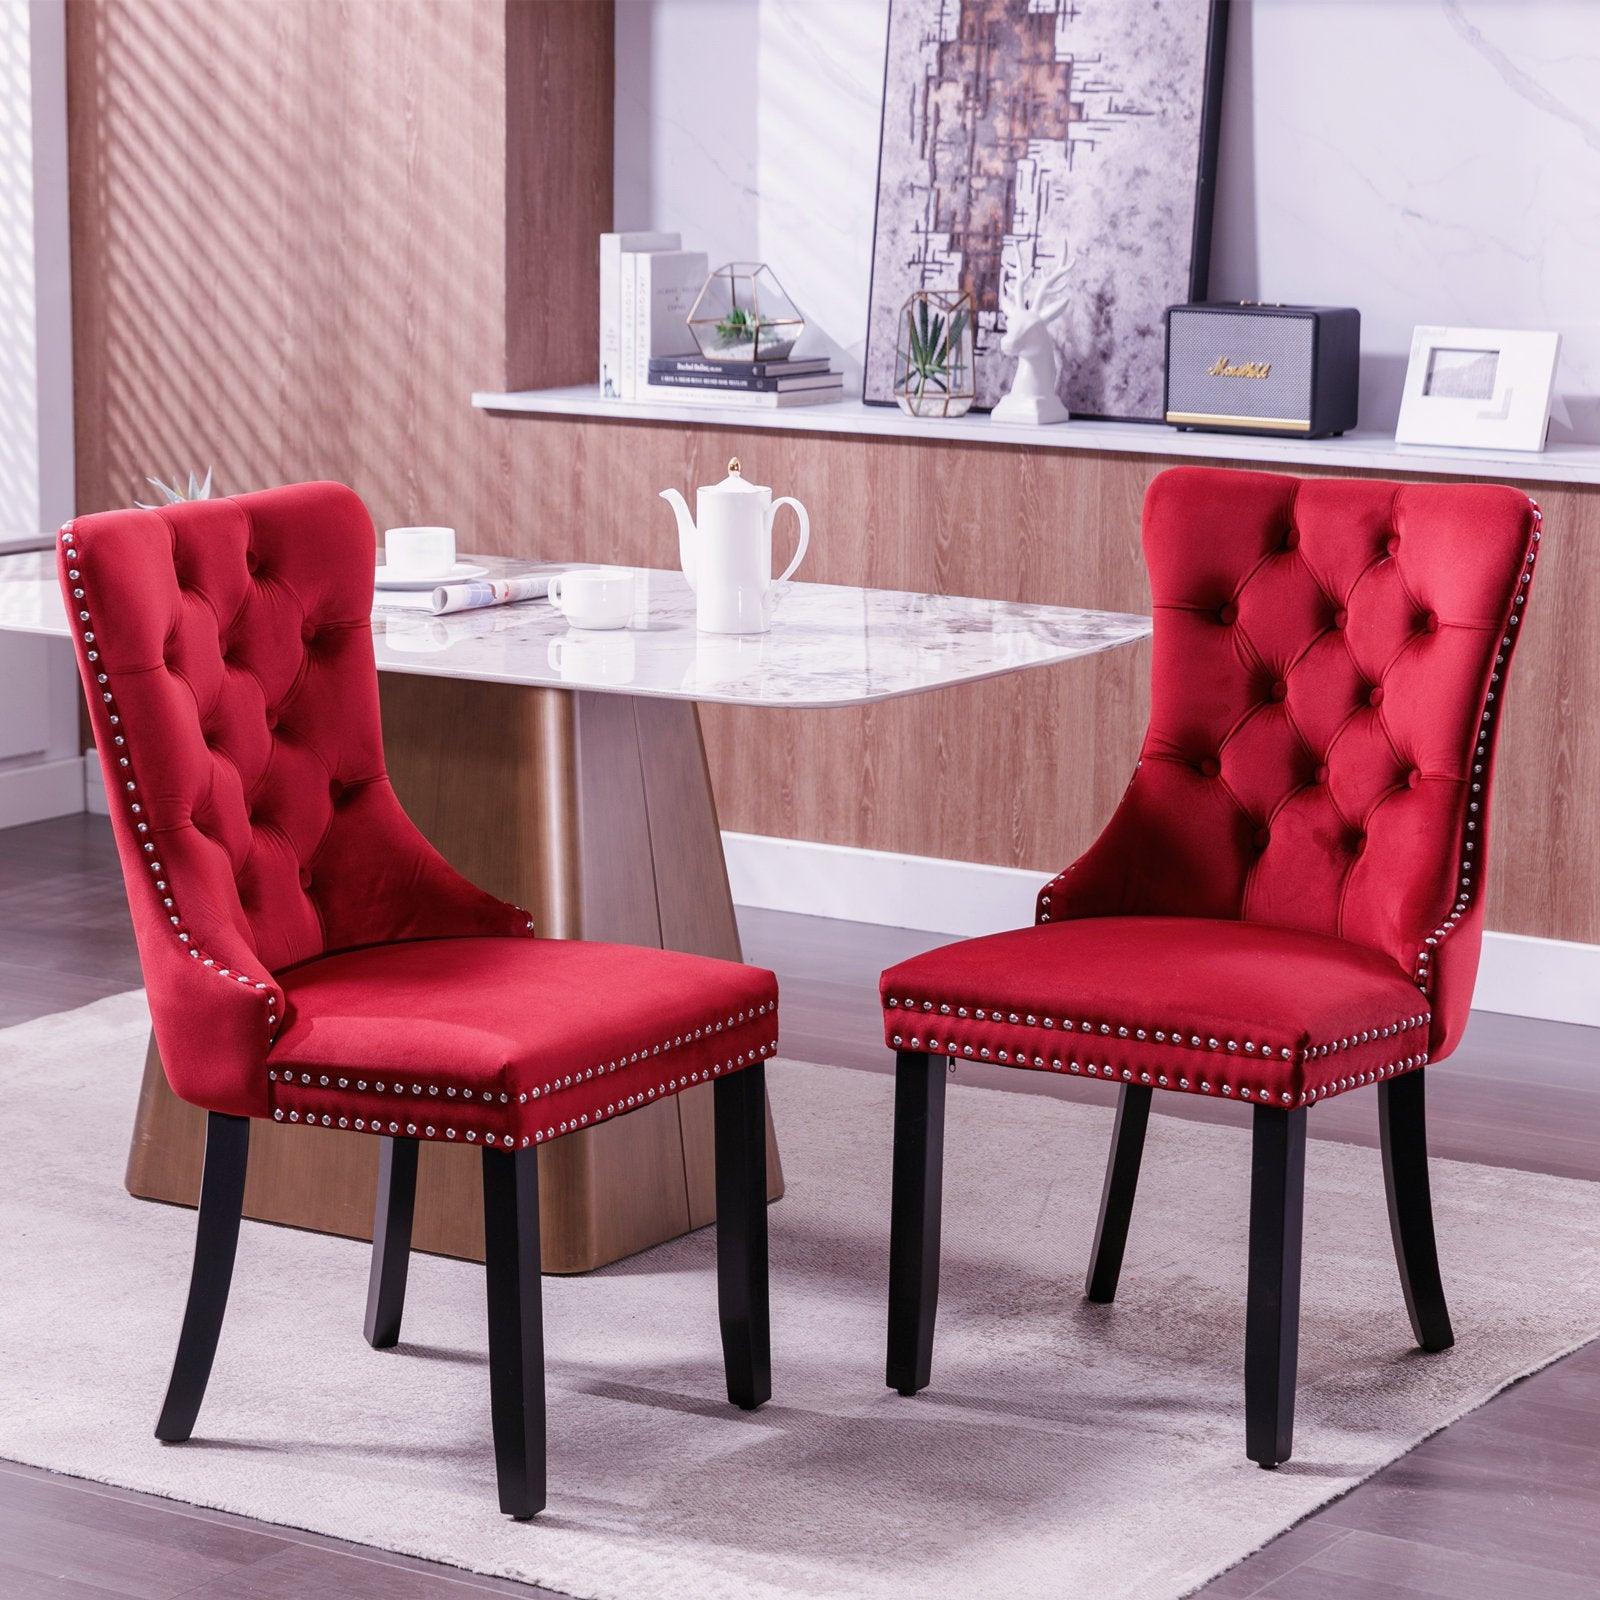 Classic Velvet Dining Chairs,  High-end Tufted Solid Wood Contemporary Velvet Upholstered Dining Chair with Wood Legs Nailhead, SET OF 2, Burgundy, Wine Red, SW2001WR LamCham